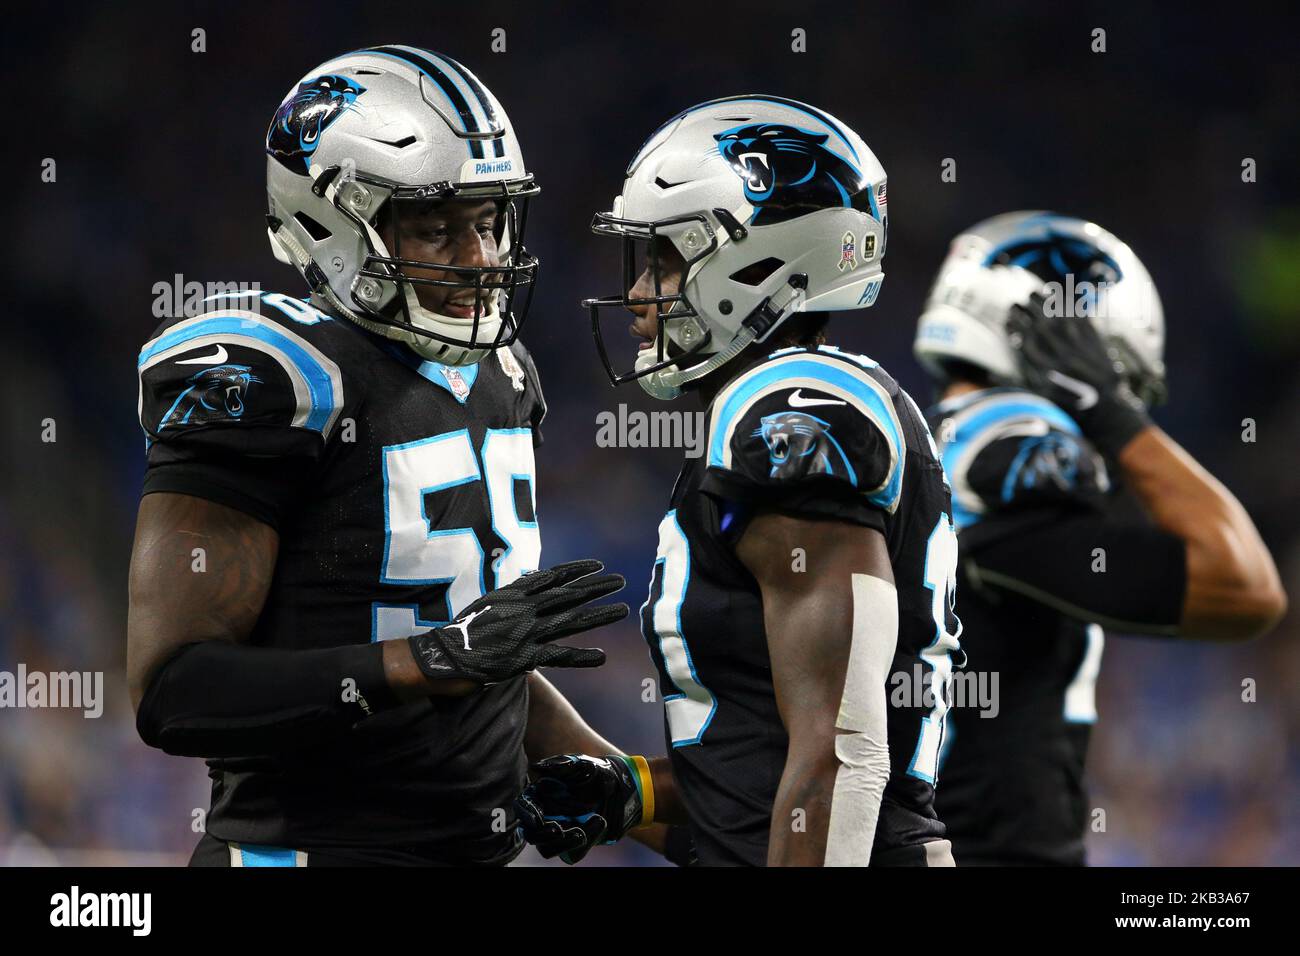 Carolina Panthers outside linebacker Thomas Davis (58) talks with Carolina Panthers wide receiver Curtis Samuel (10) after a play during the first half of an NFL football game against the Carolina Panthers in Detroit, Michigan USA, on Sunday, November 18, 2018. (Photo by Amy Lemus/NurPhoto) Stock Photo